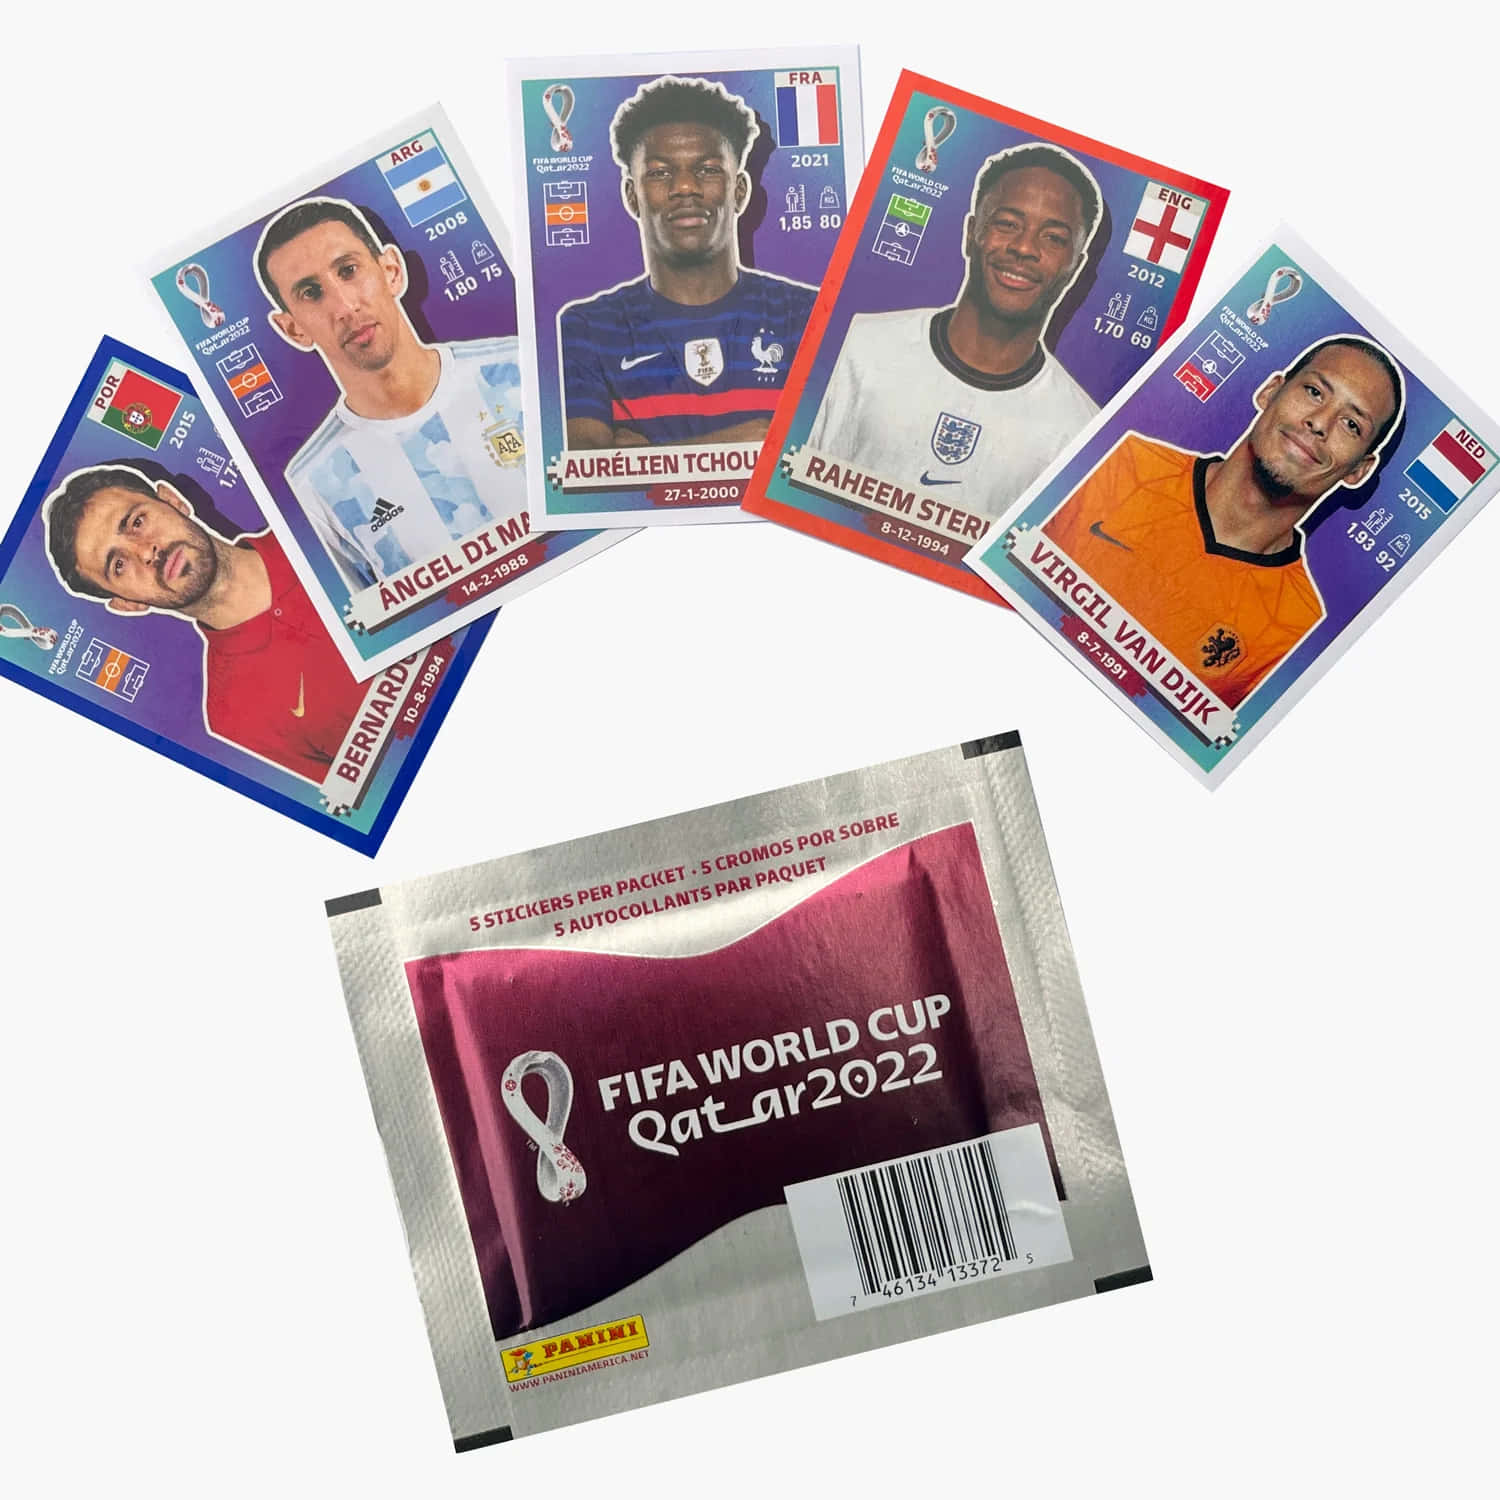 A Pack Of Football Cards With Five Players On Them